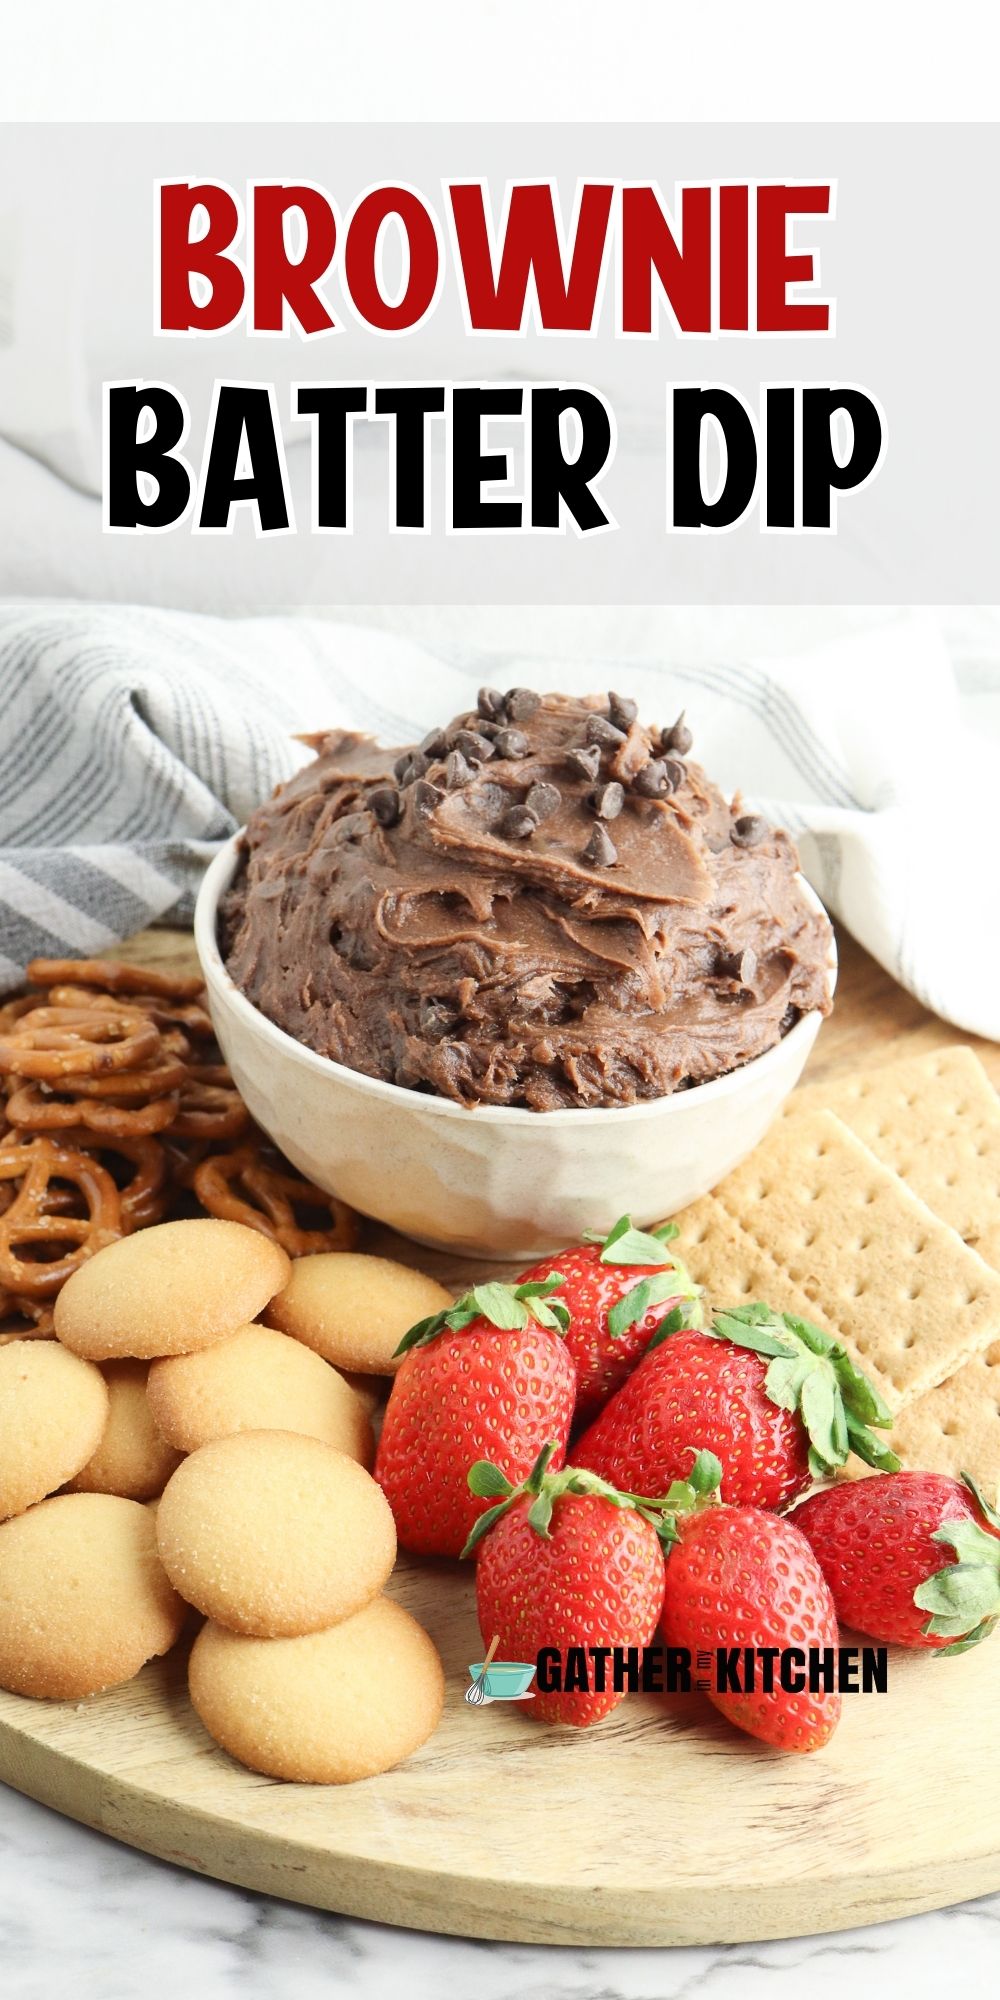 Pin image: top says "Brownie Batter Dip" and background is brownie batter dip with fruits, pretzels and crackers.